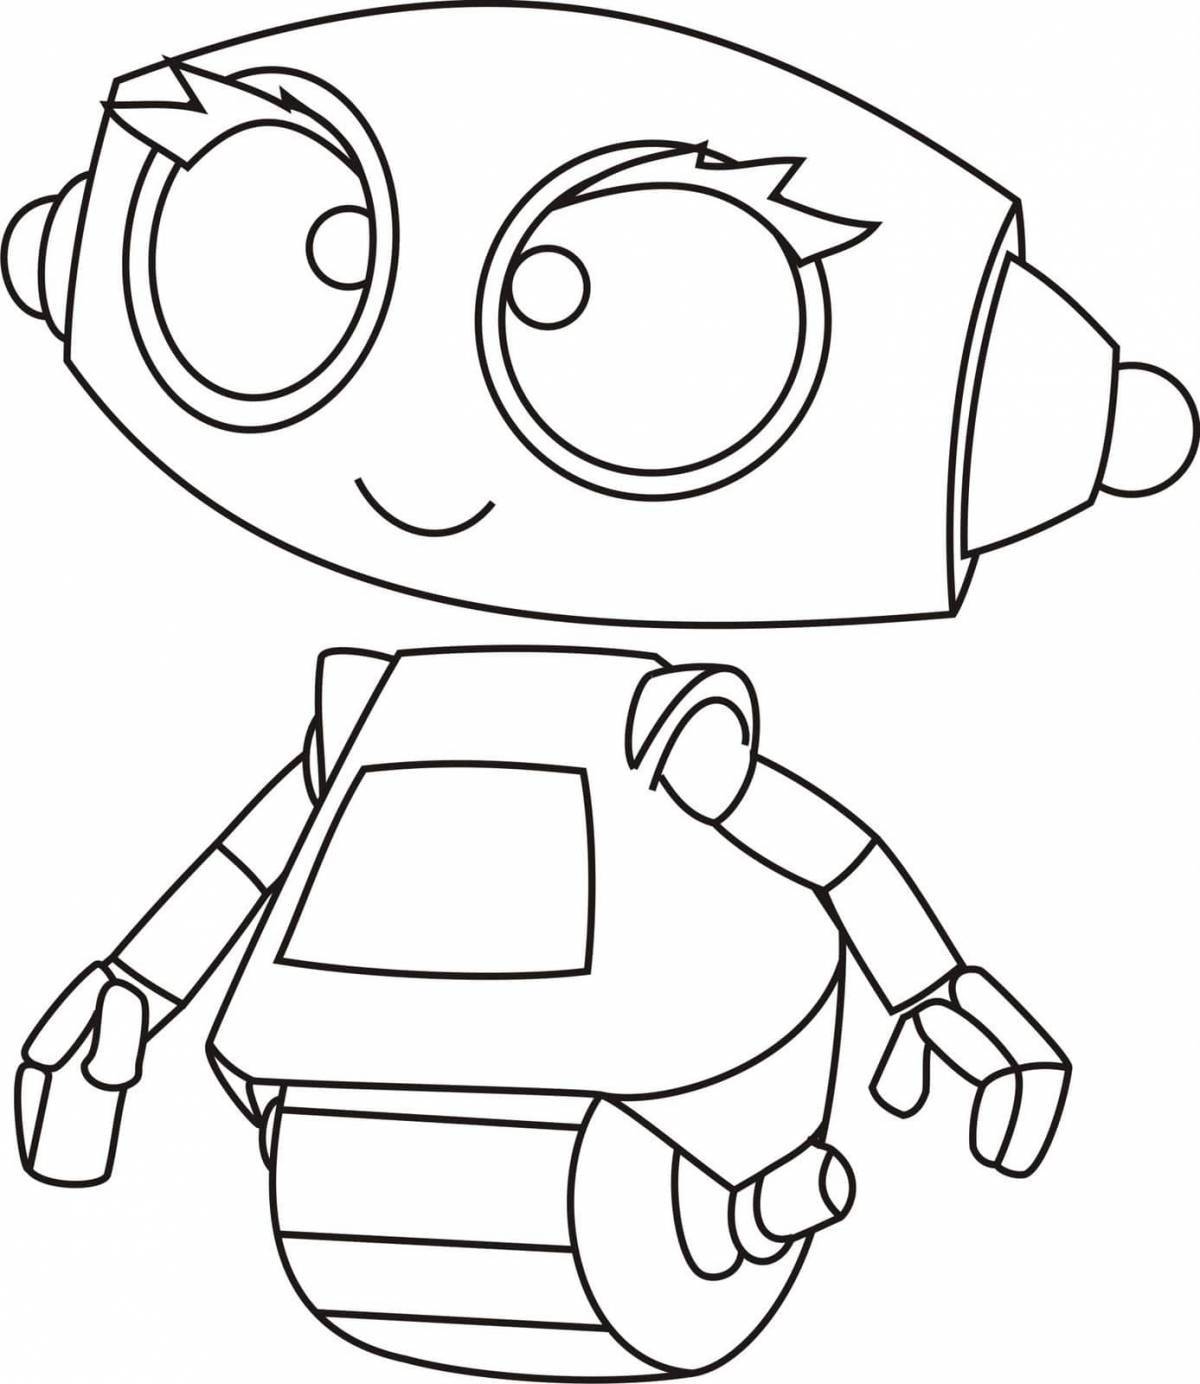 Colorful robot coloring book for 3-4 year olds